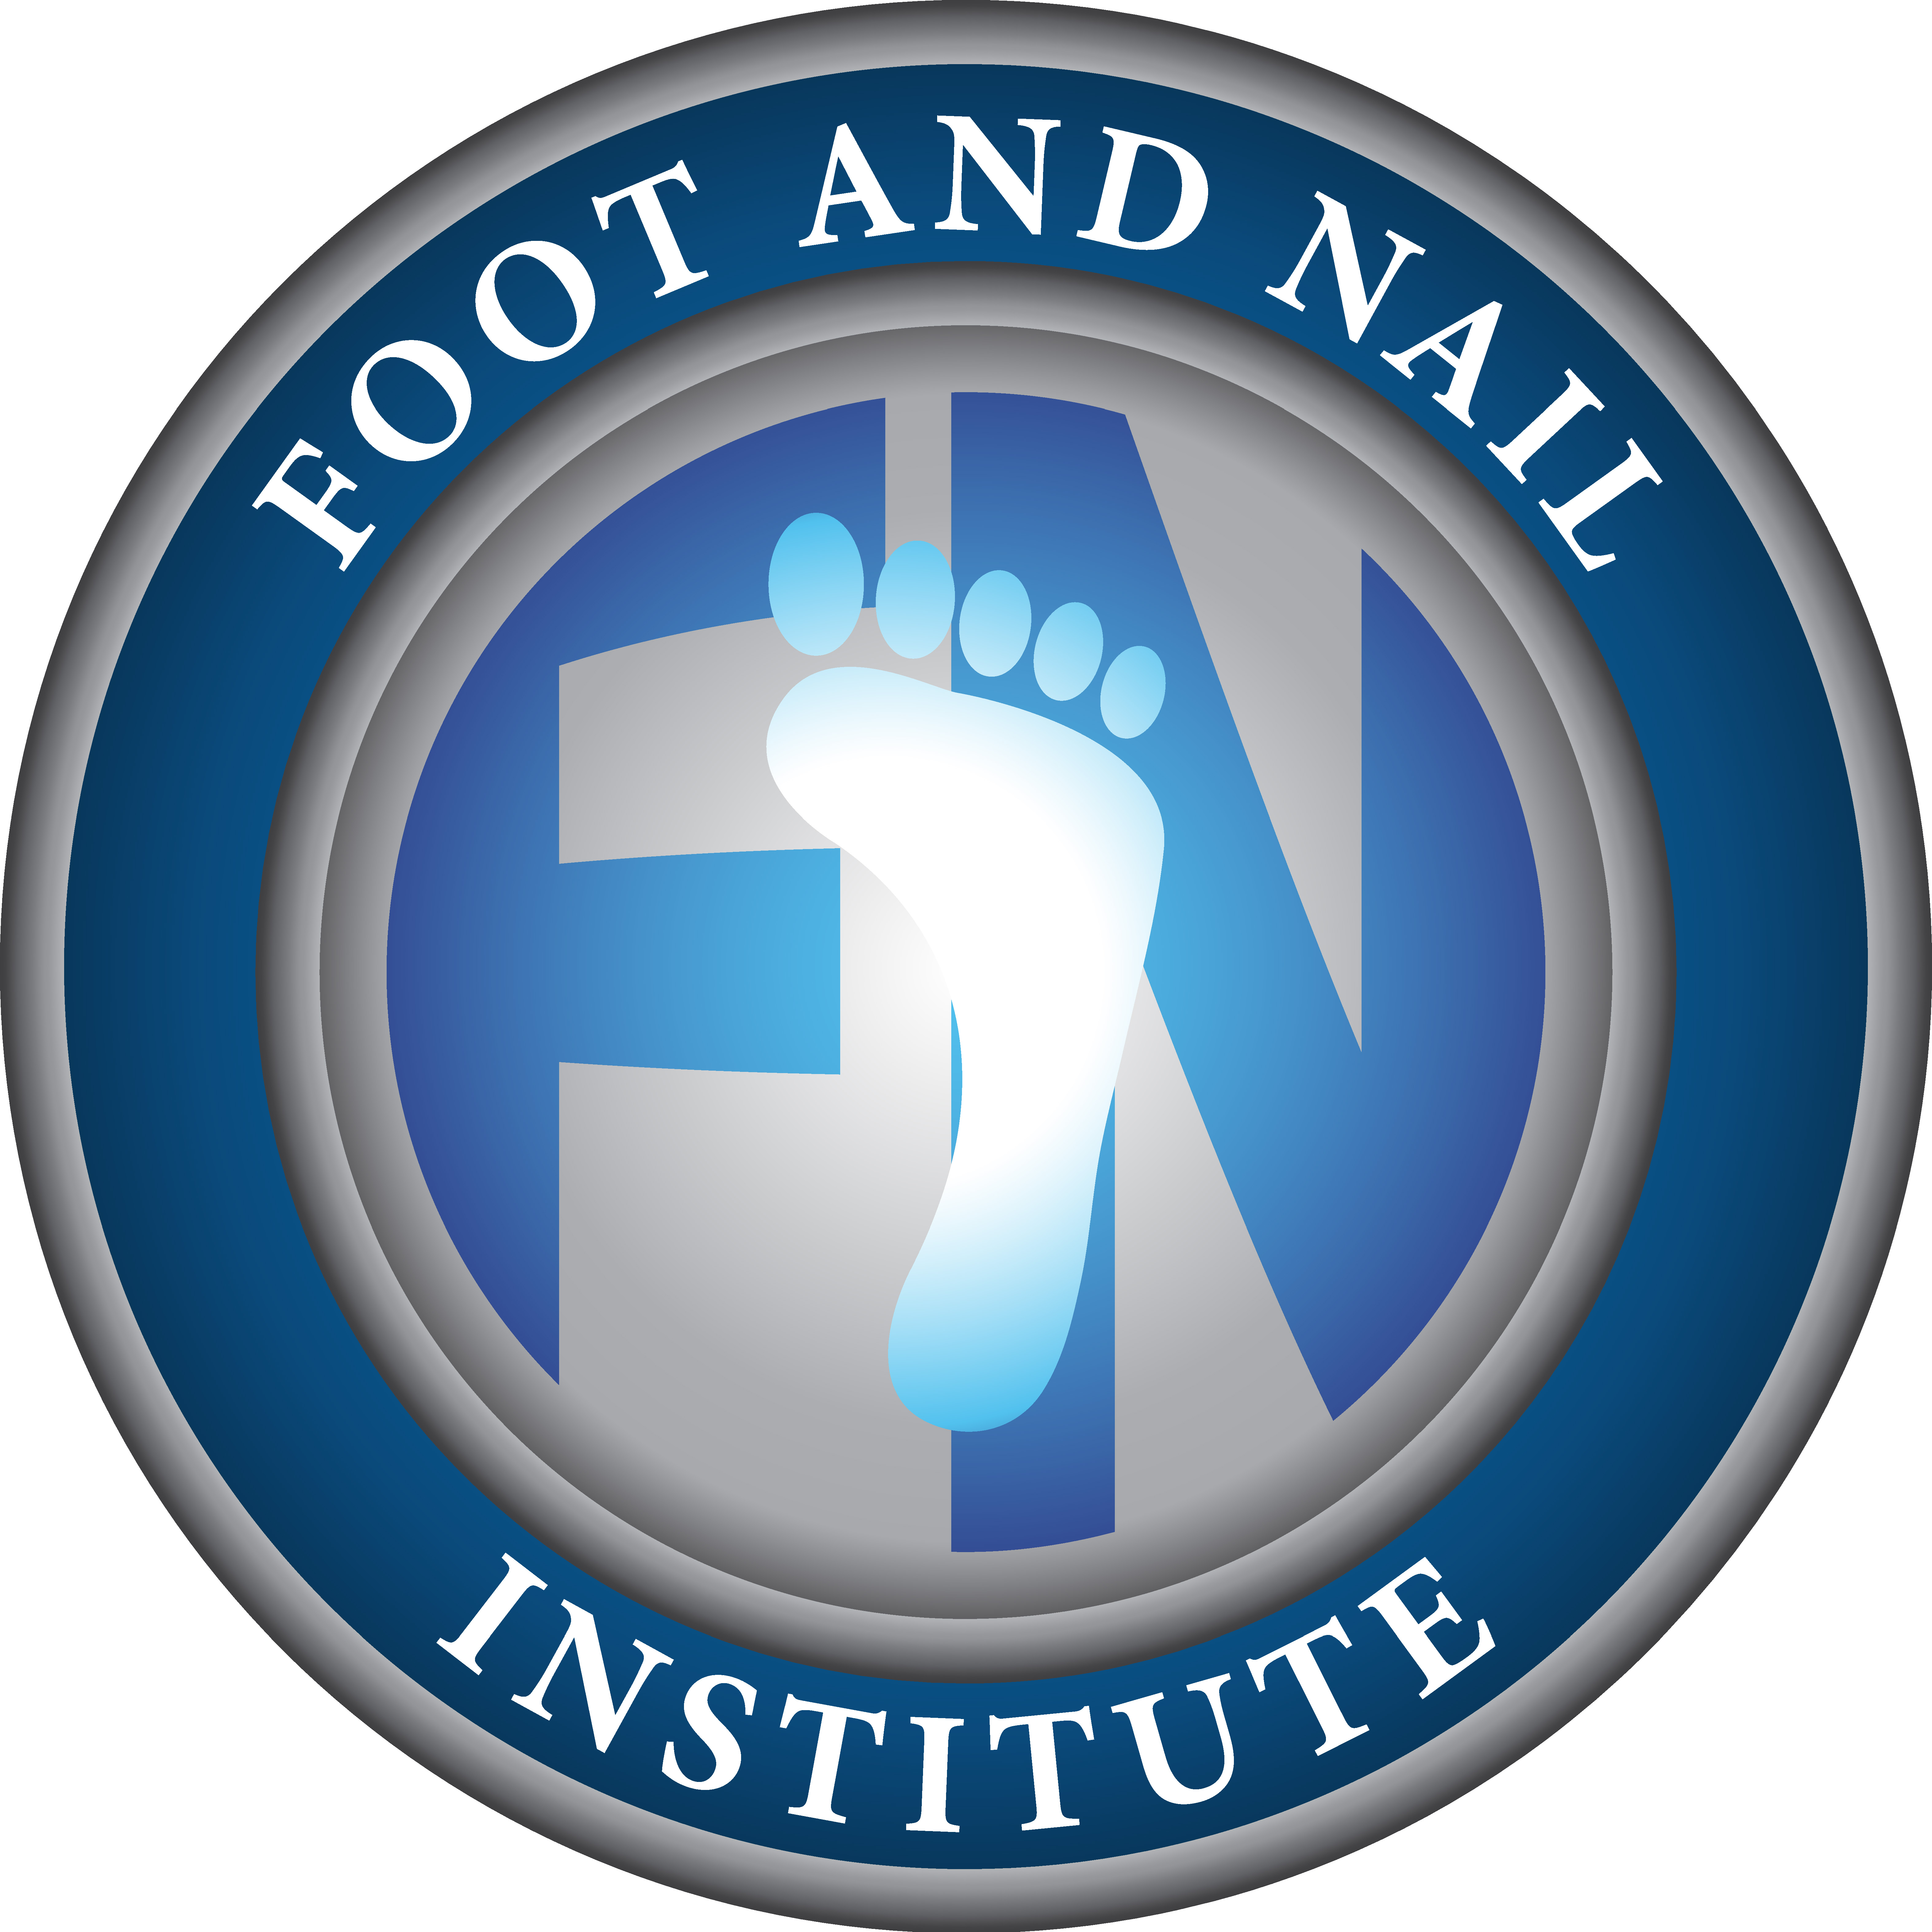 Foot Care + Business Training for Nurses, by a Nurse